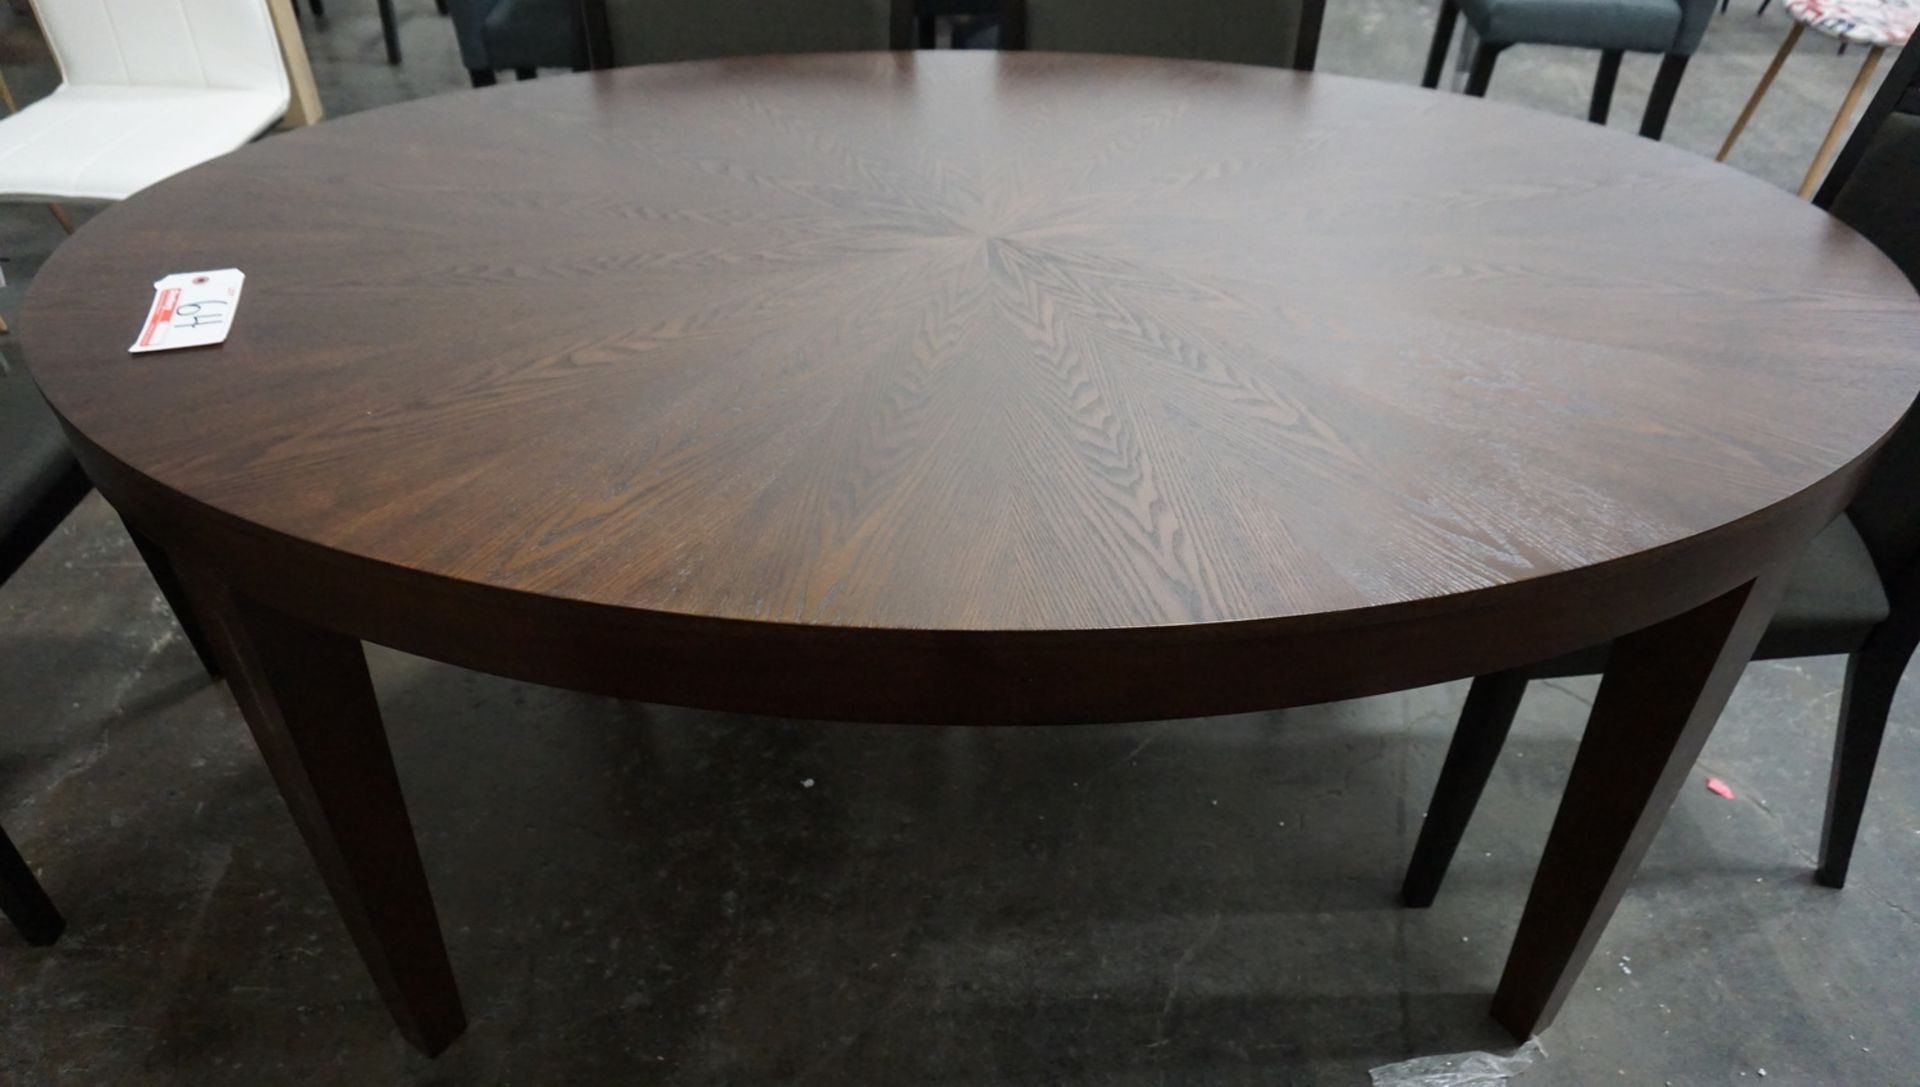 OVAL 67" X 43.5" X 295." DINING TABLE - Image 2 of 2